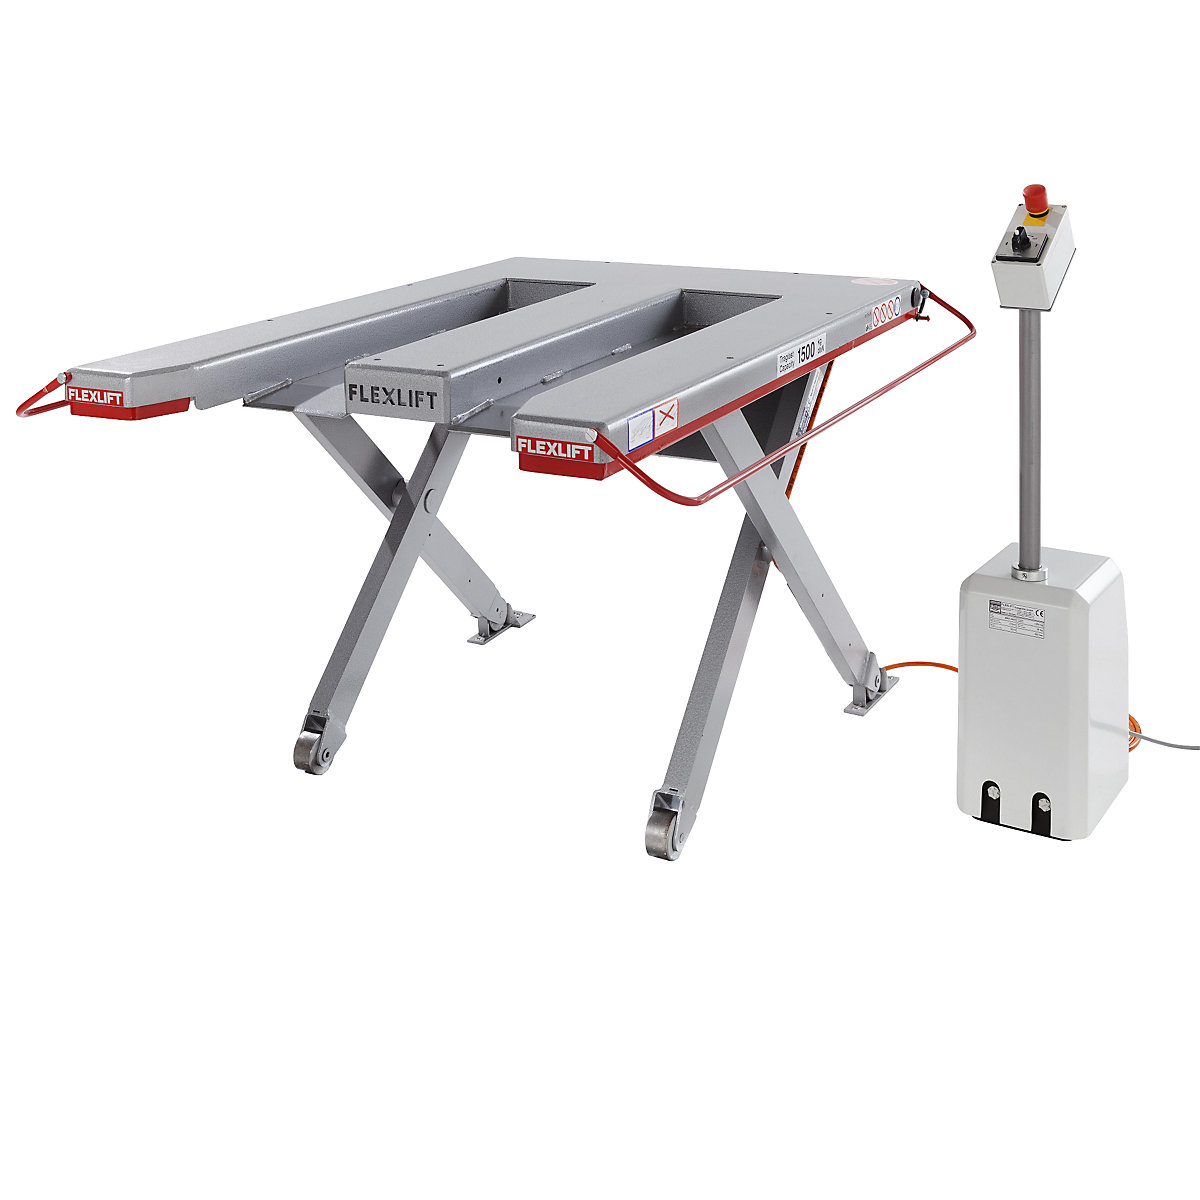 Low profile lift table, E series – Flexlift, max. load 1500 kg, LxW 1300 x 910 mm, 400 V 3-phase